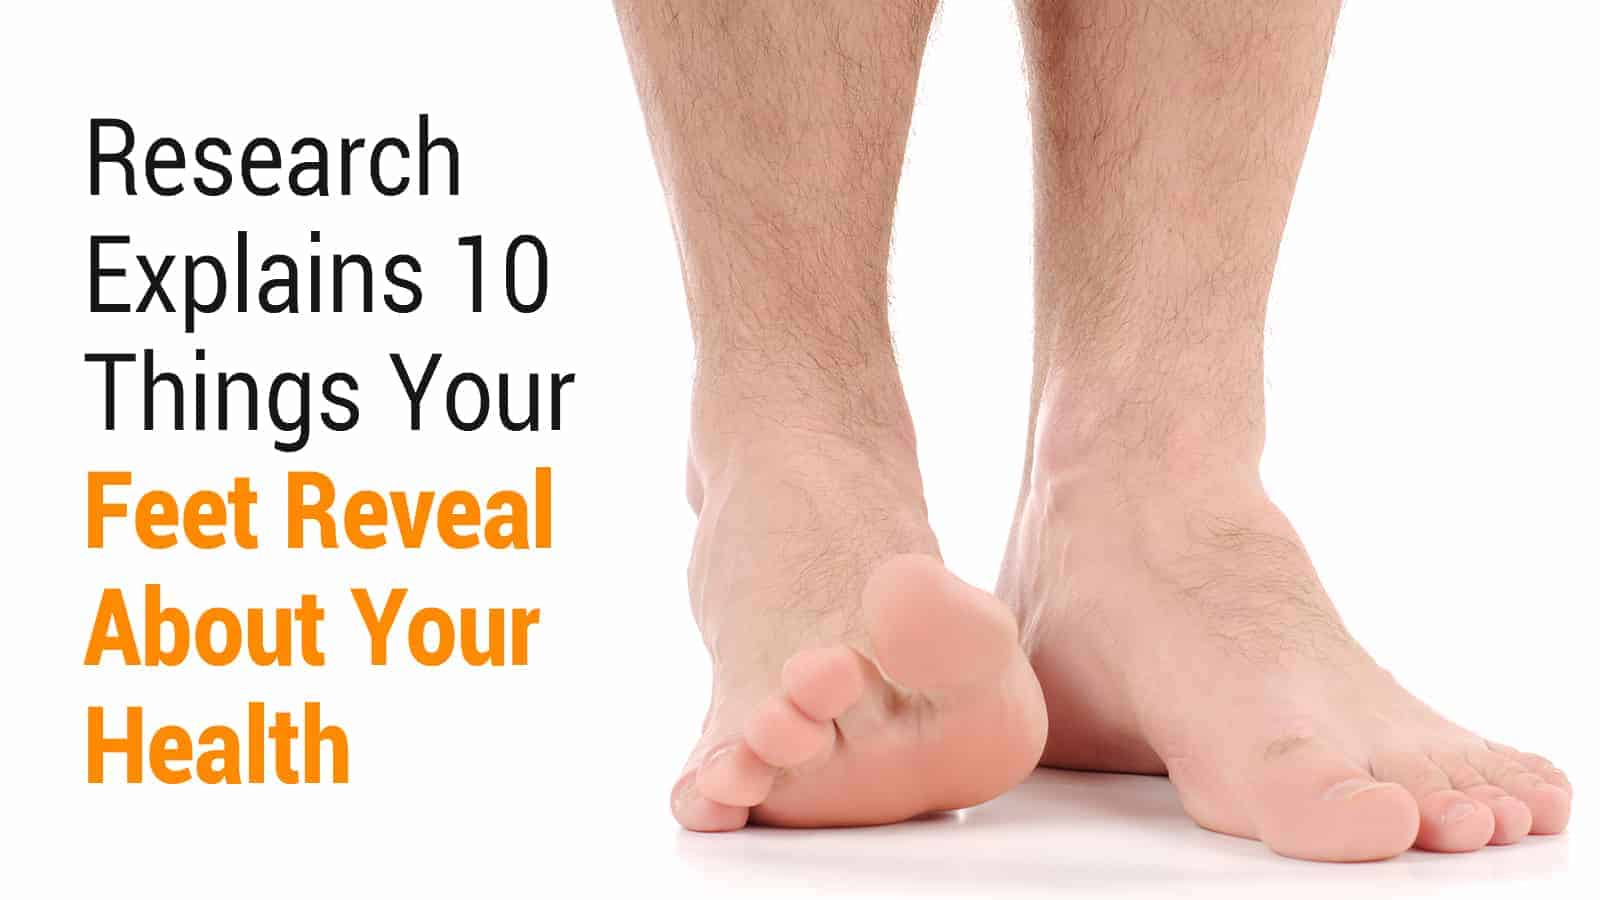 Research Explains 10 Things Your Feet Reveal About Your Health